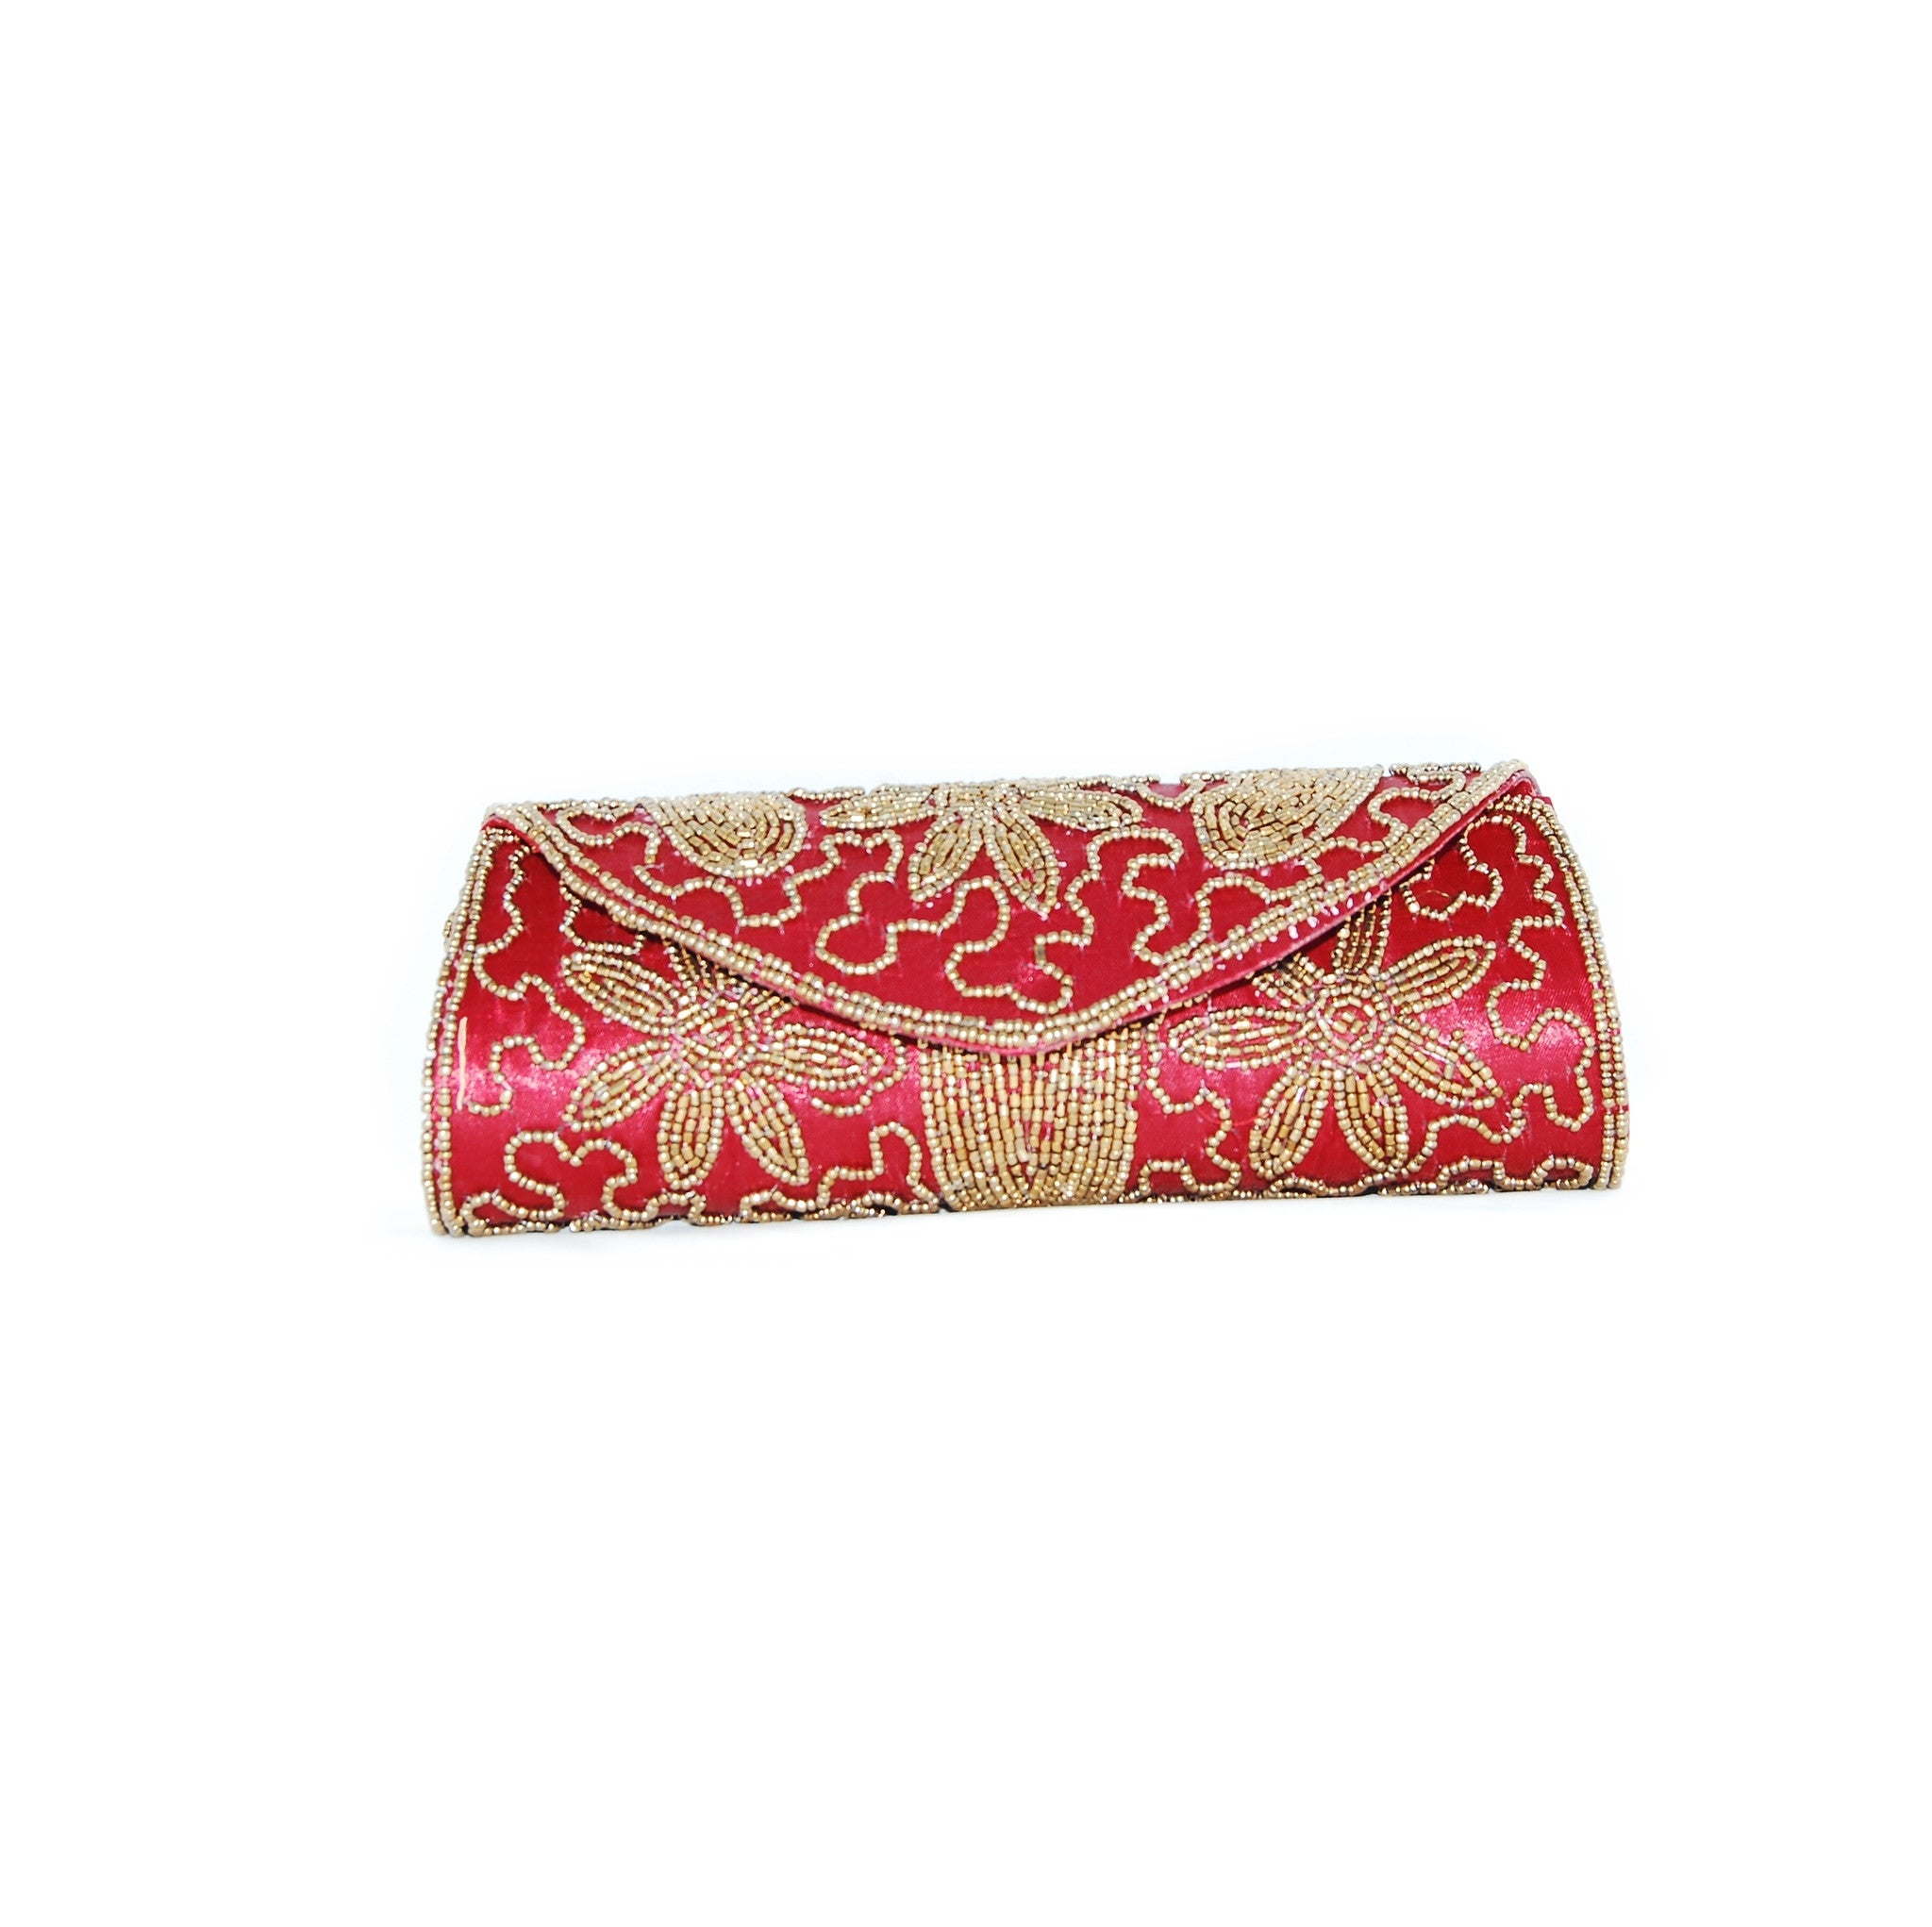 Red color Dupion Silk Clutch Bag with beads and Stone work